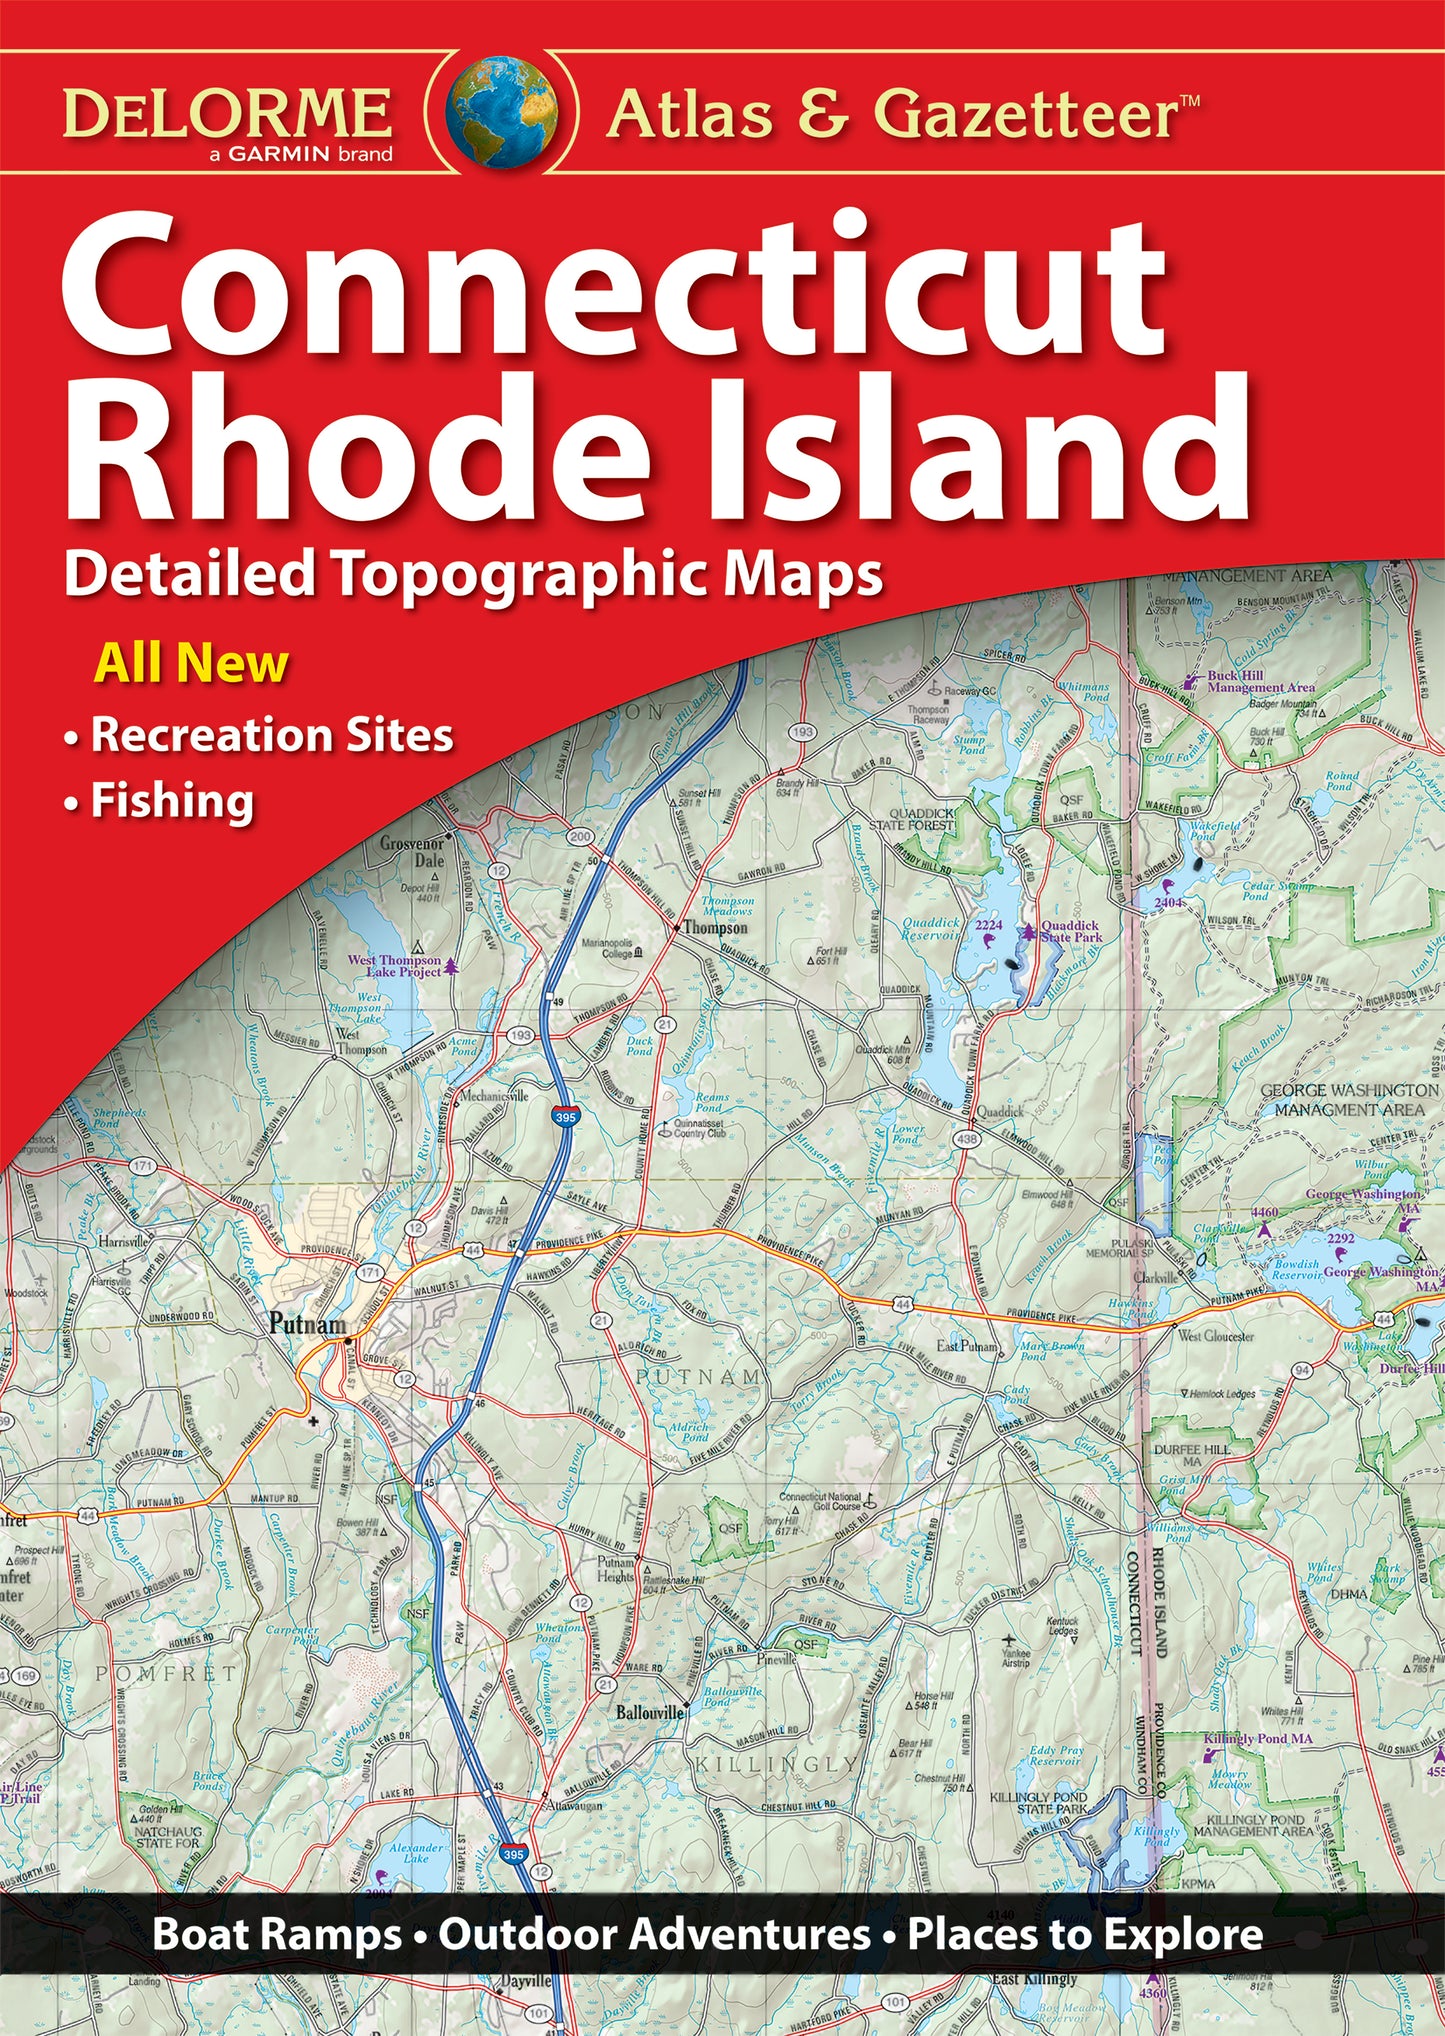 DeLorme Atlas and Gazetteer Connecticut and Rhode Island